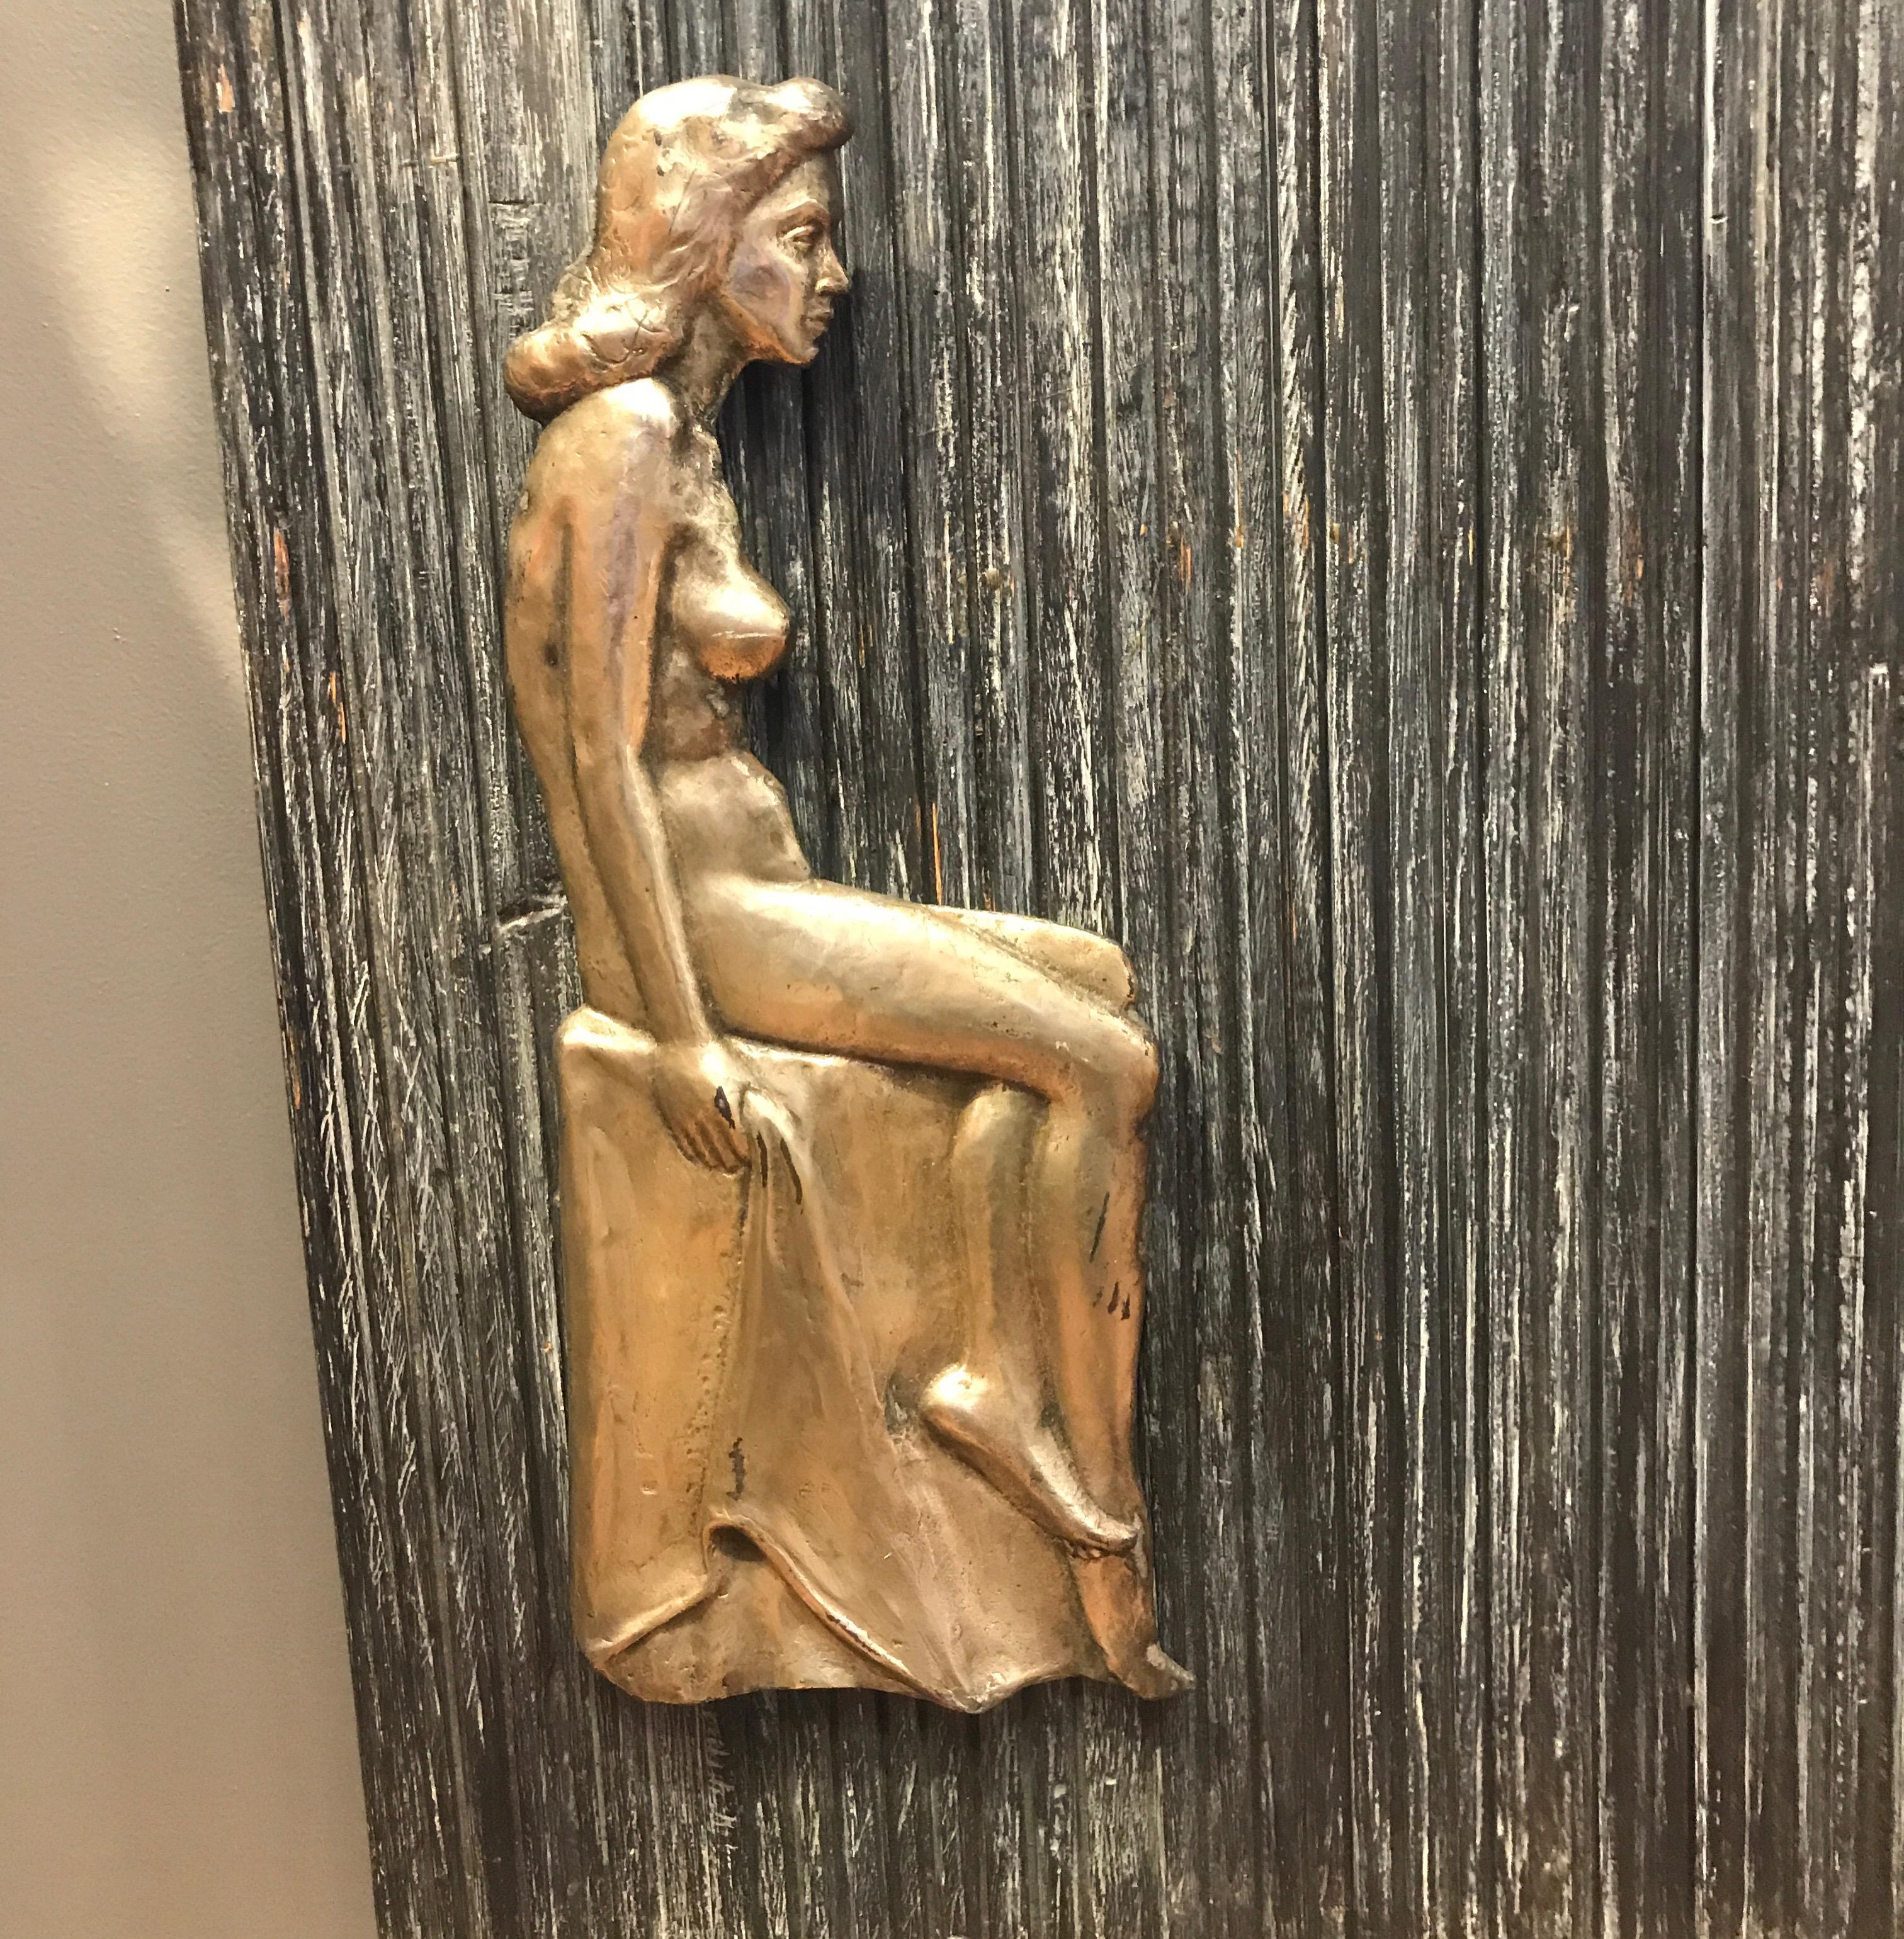 Gorham sterling relief plaque, Eugene Gauss (American, 1905-1988), unique cast sterling relief of a sitting female nude, channel carved wood backing, stamped 